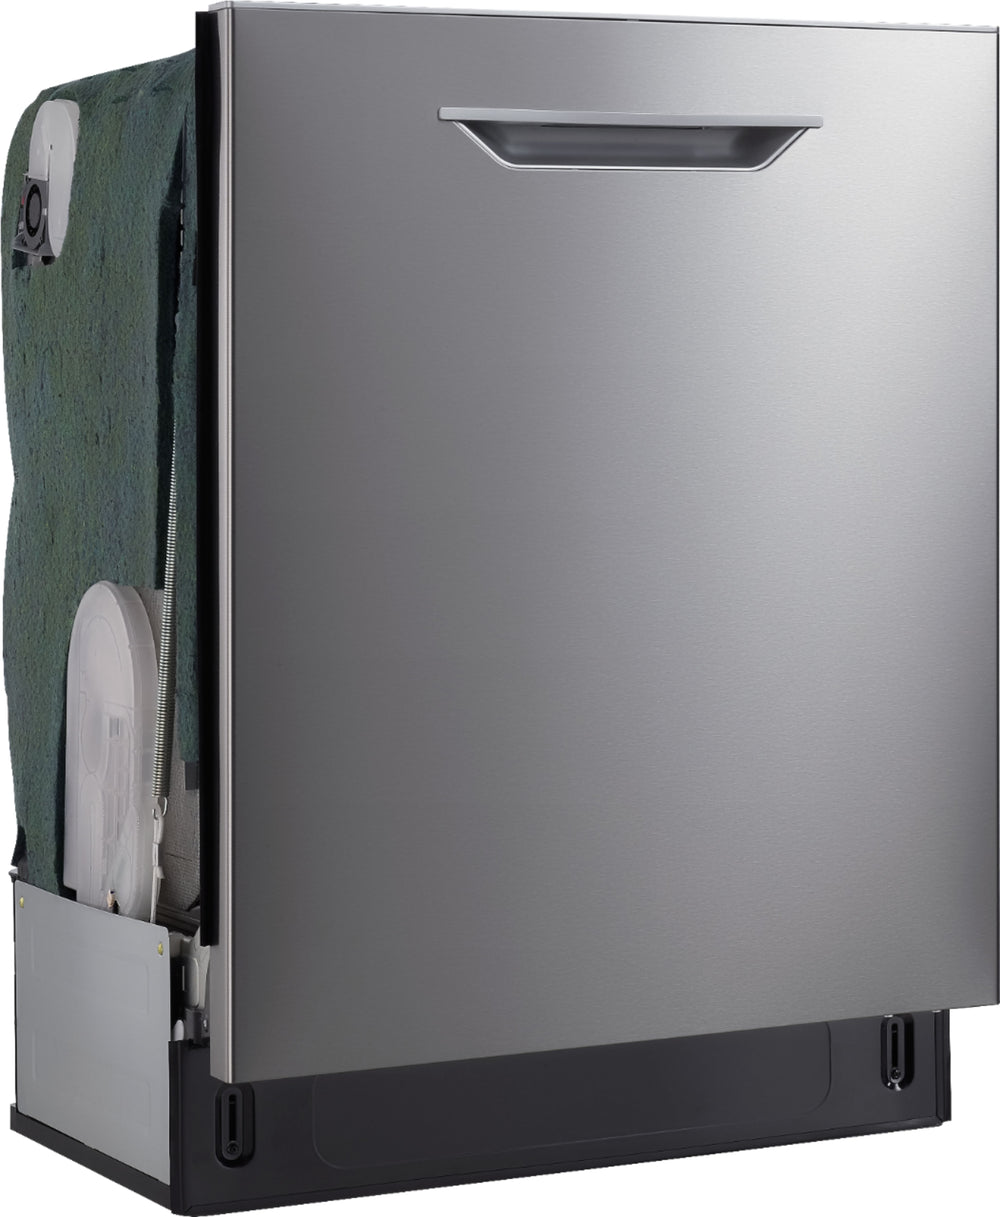 Insignia™ - 24" Top Control Built-In Dishwasher - Stainless steel_1